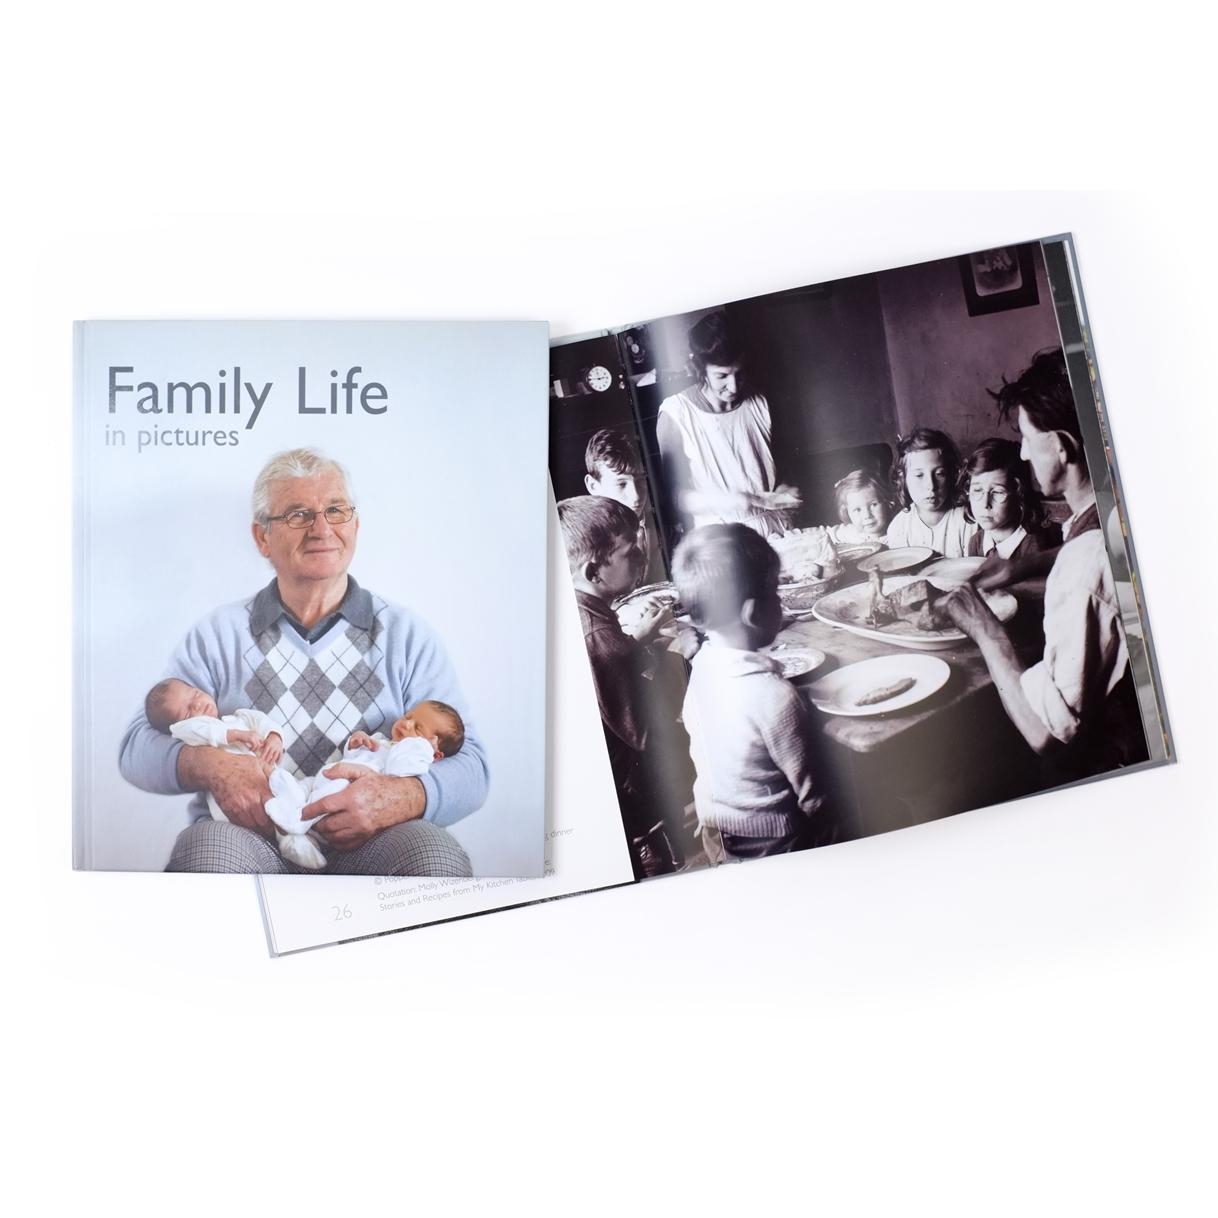 Reminiscence Pictures To Share Book - Family Life